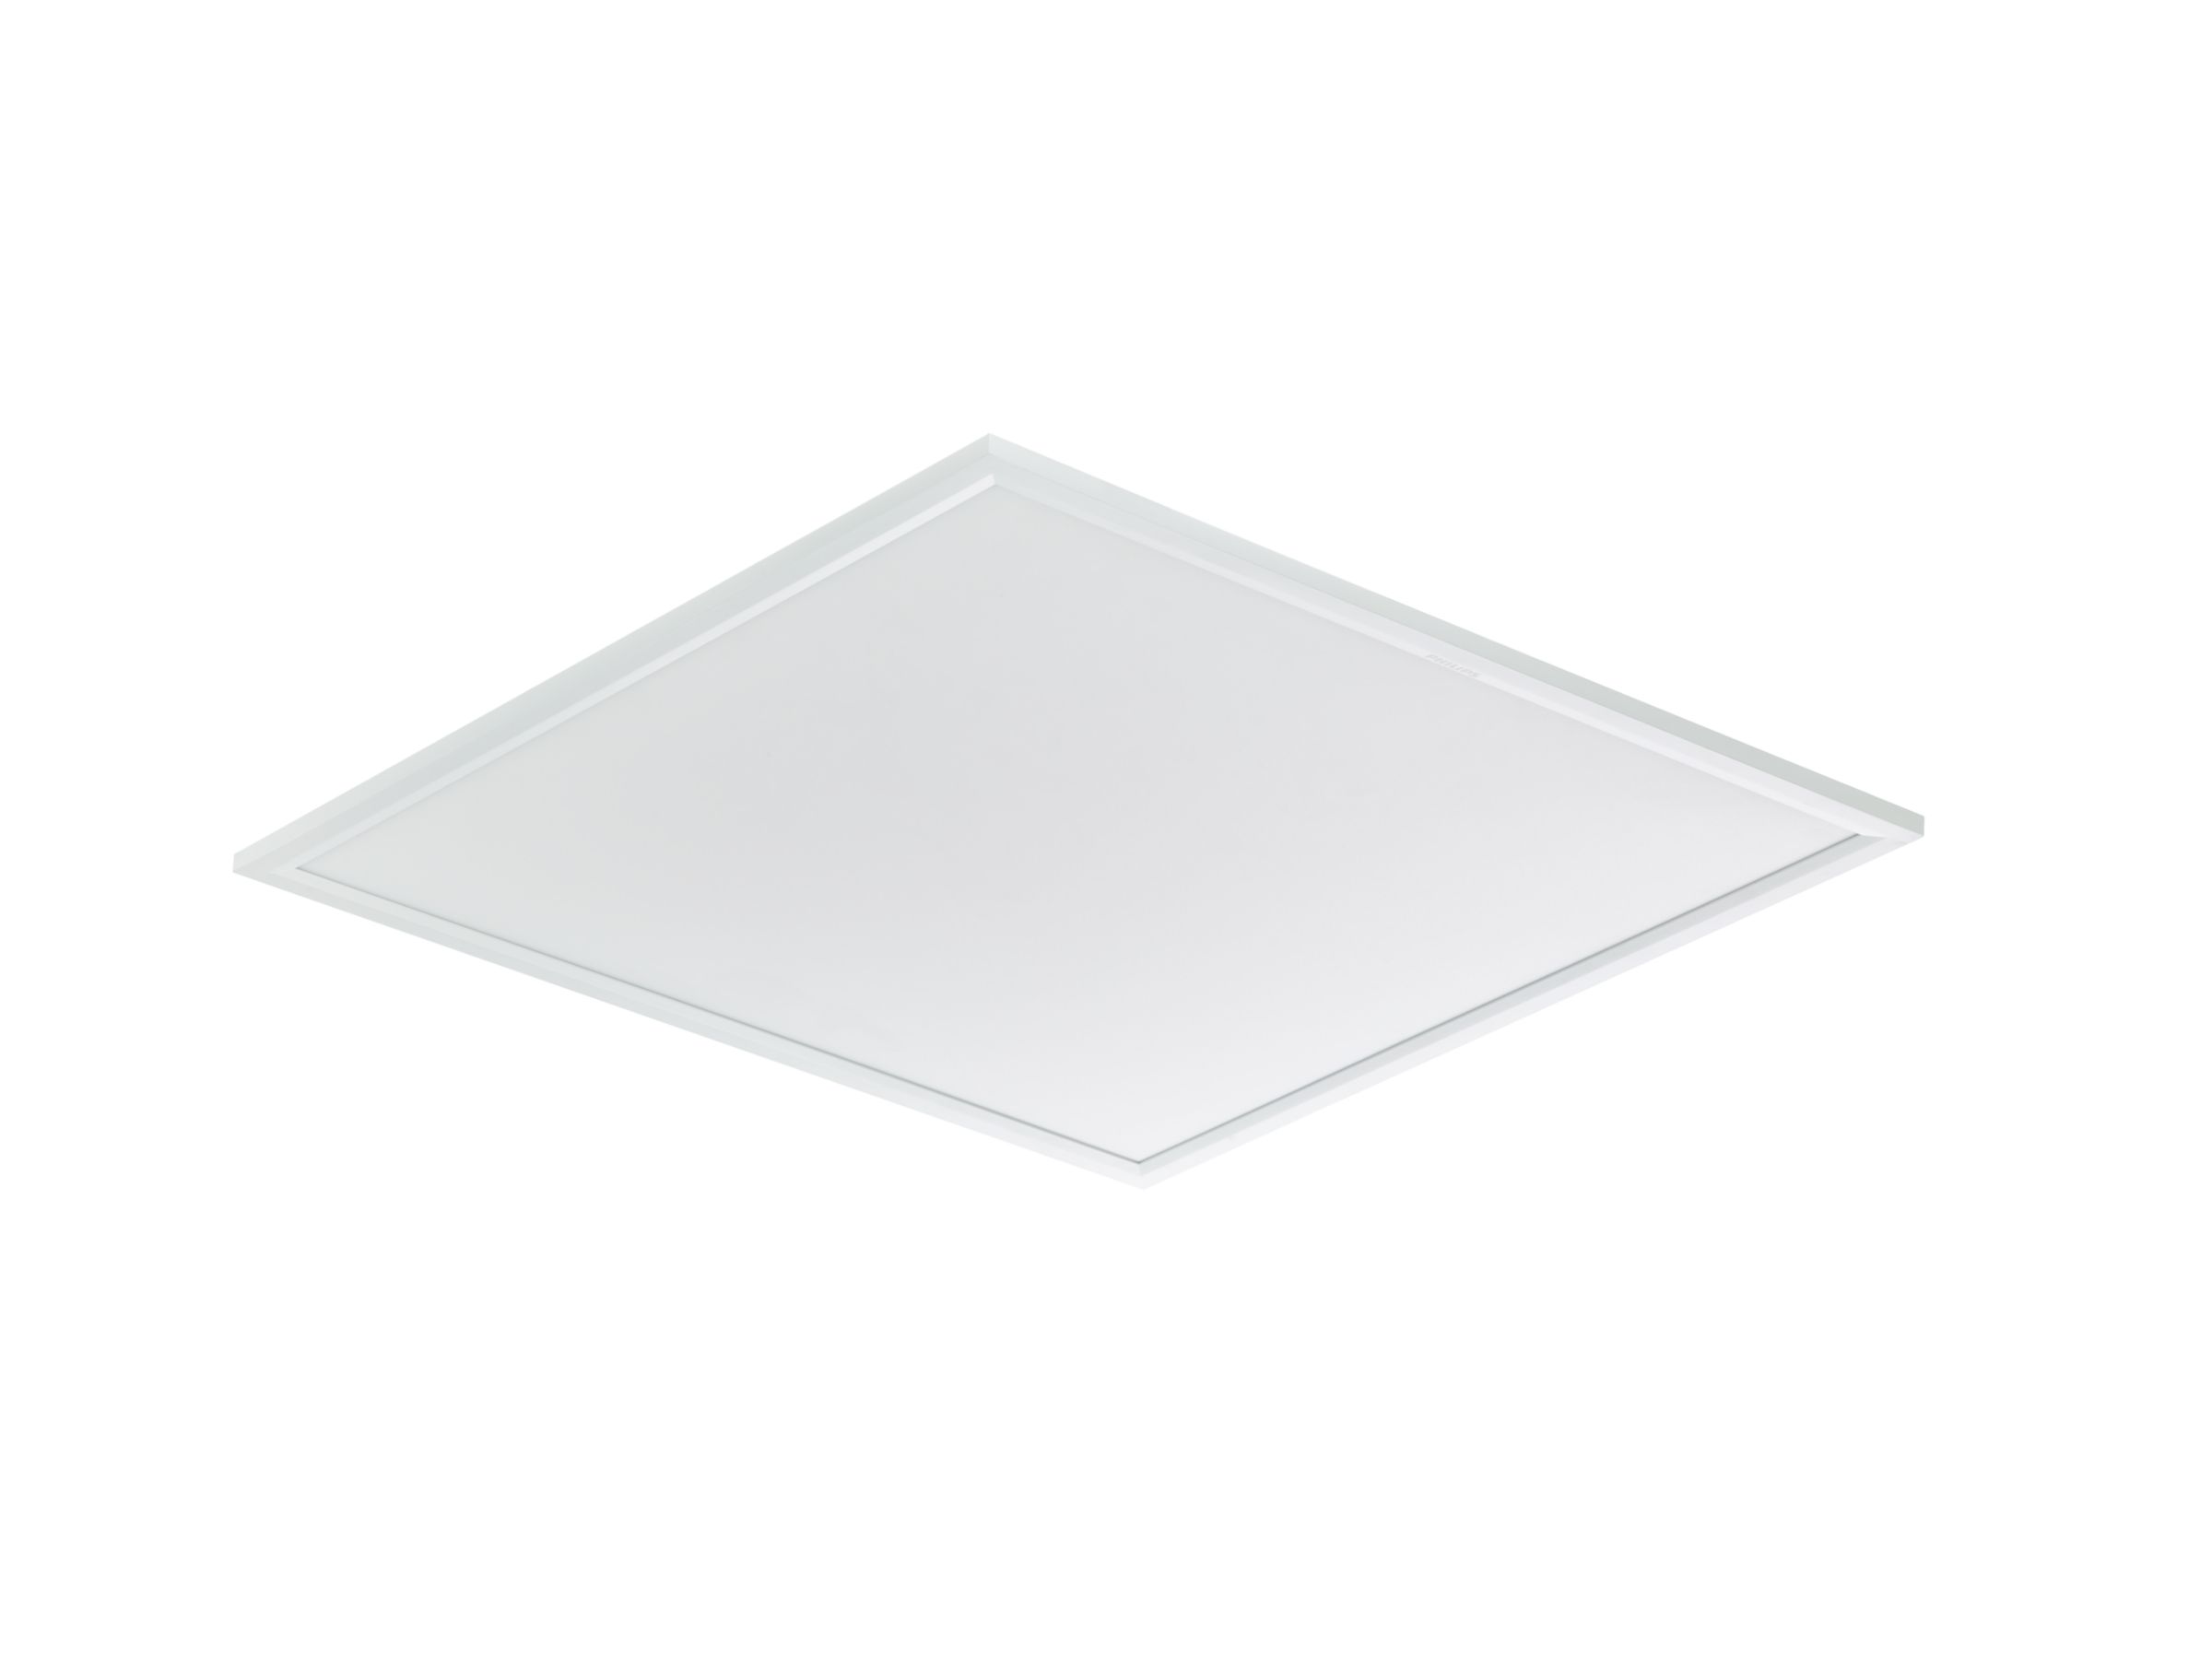 Biard LED 40W Square 600 x 600mm LED Panel 3000 Lumens Warm White With LED Driver 5 Years Warranty